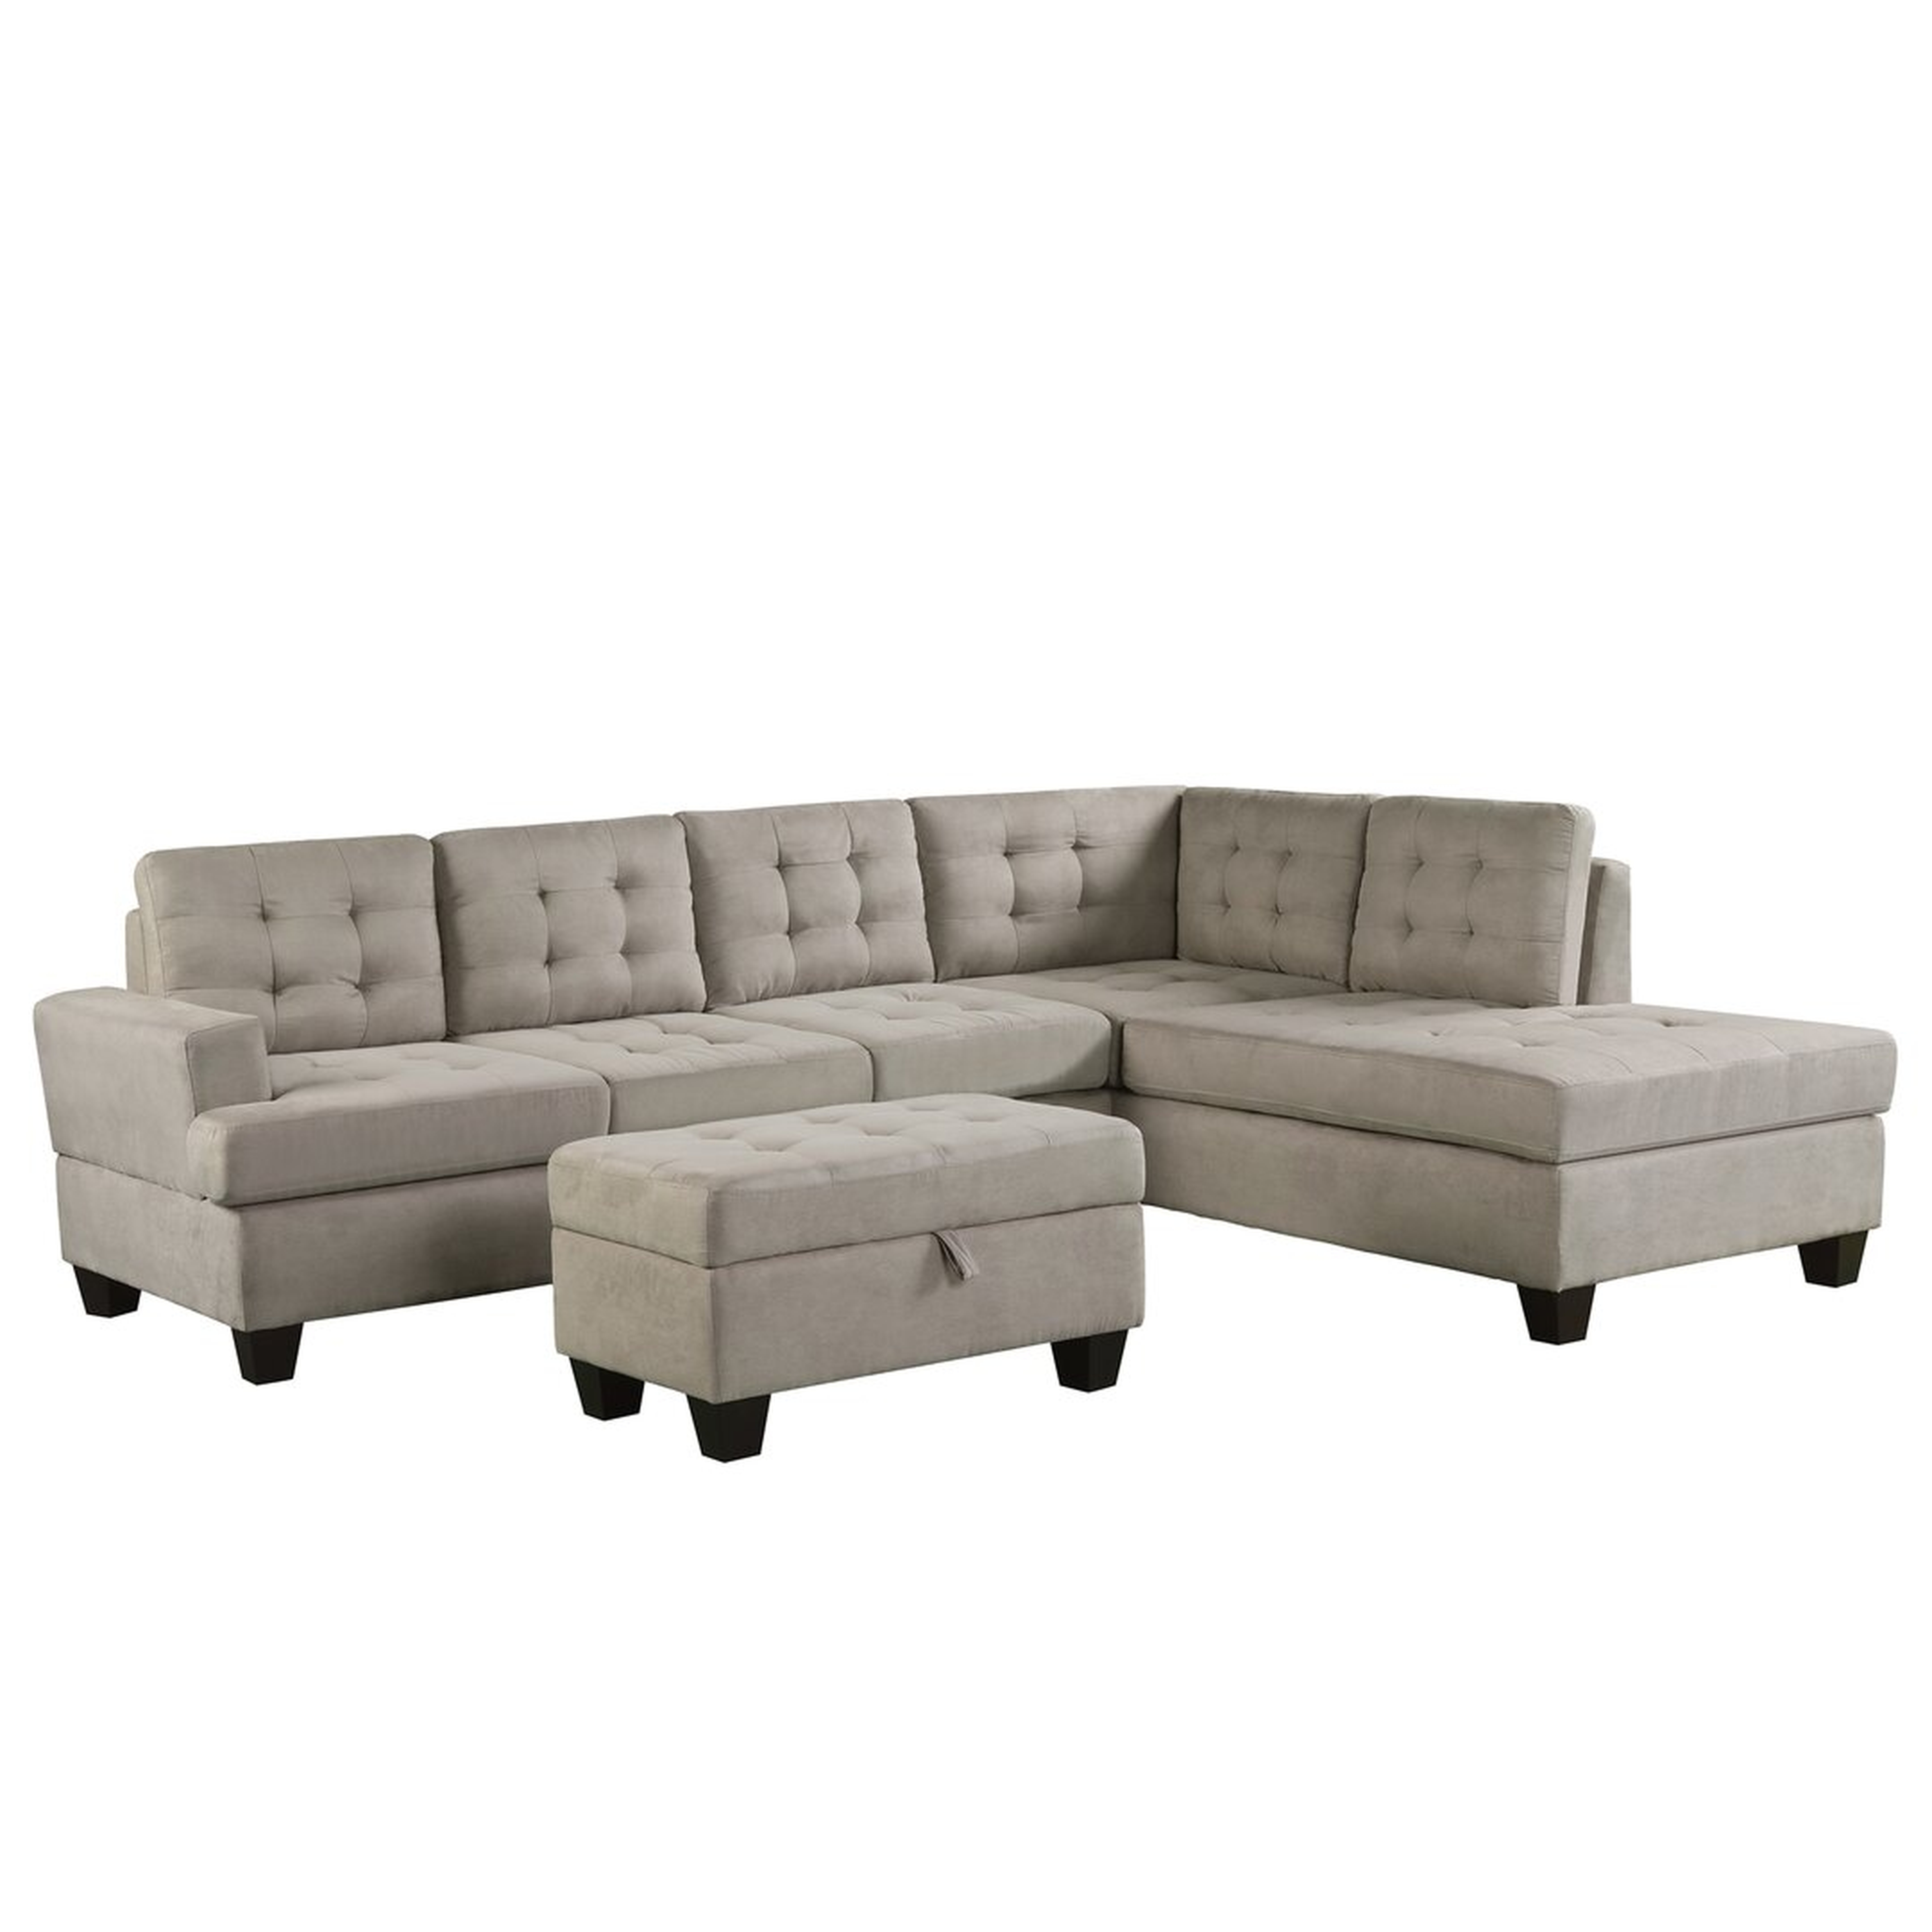 "Knlnny Ware Sofa 3-Piece Sectional Sofa With Chaise Lounge And Storage Ottoman L Shape Couch Living Room Furniture Gray" - Perigold